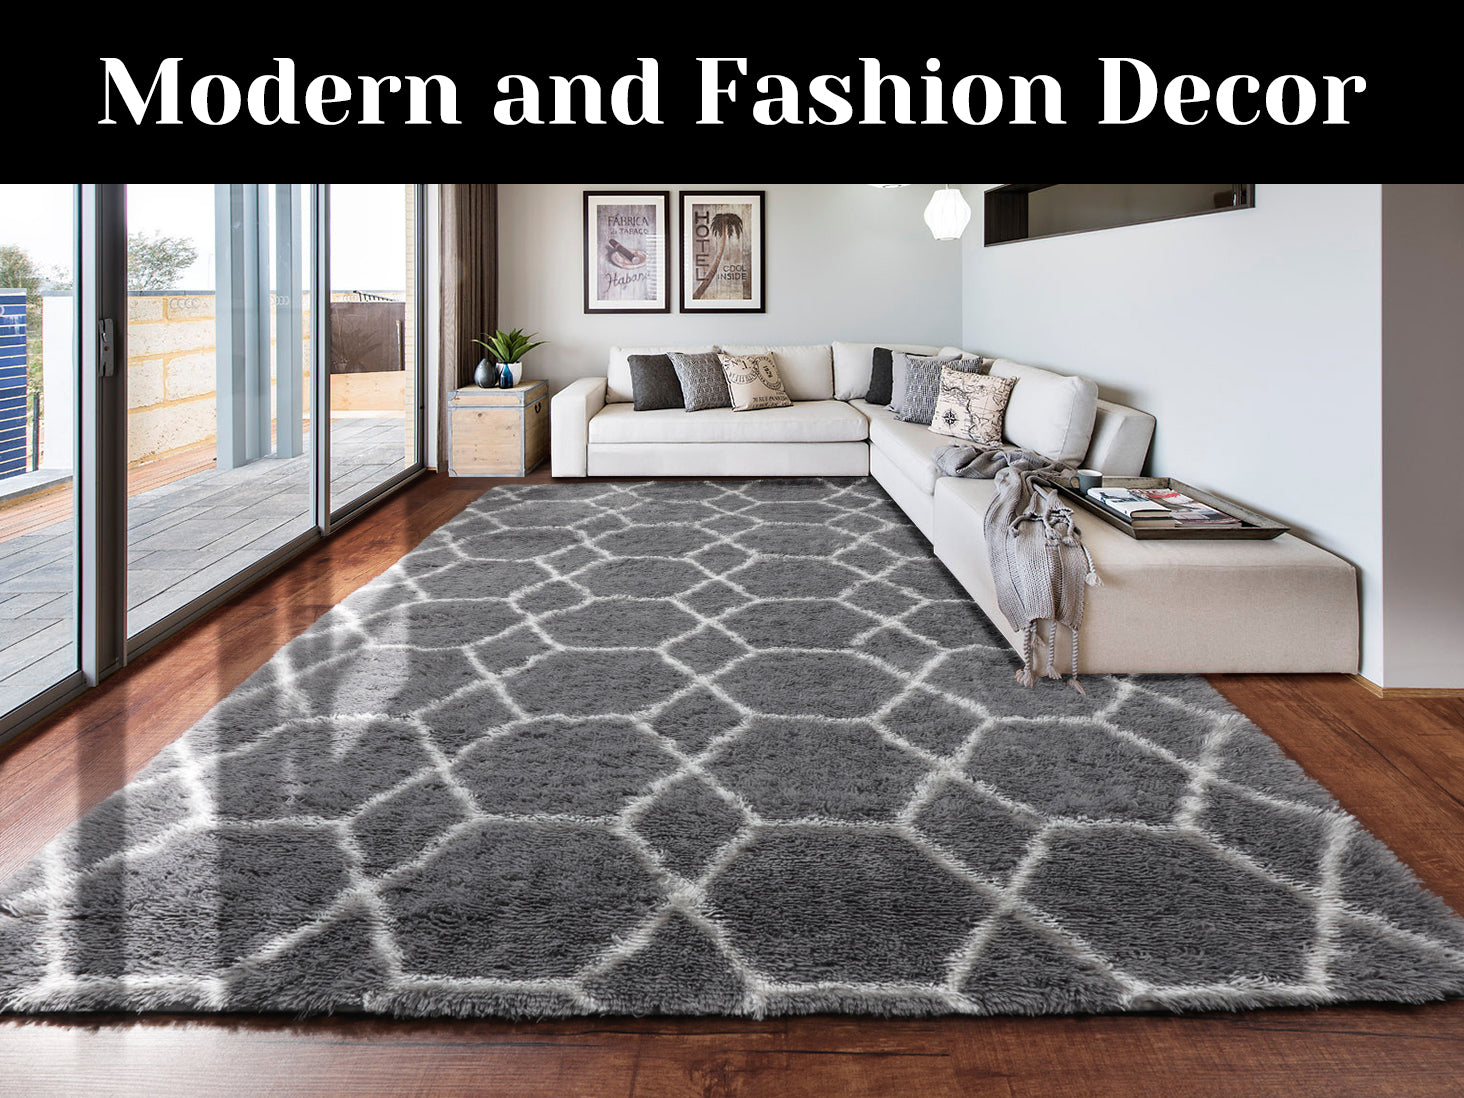 Moroccan Area Rug for Bedroom Living Room, Grey and White Rug